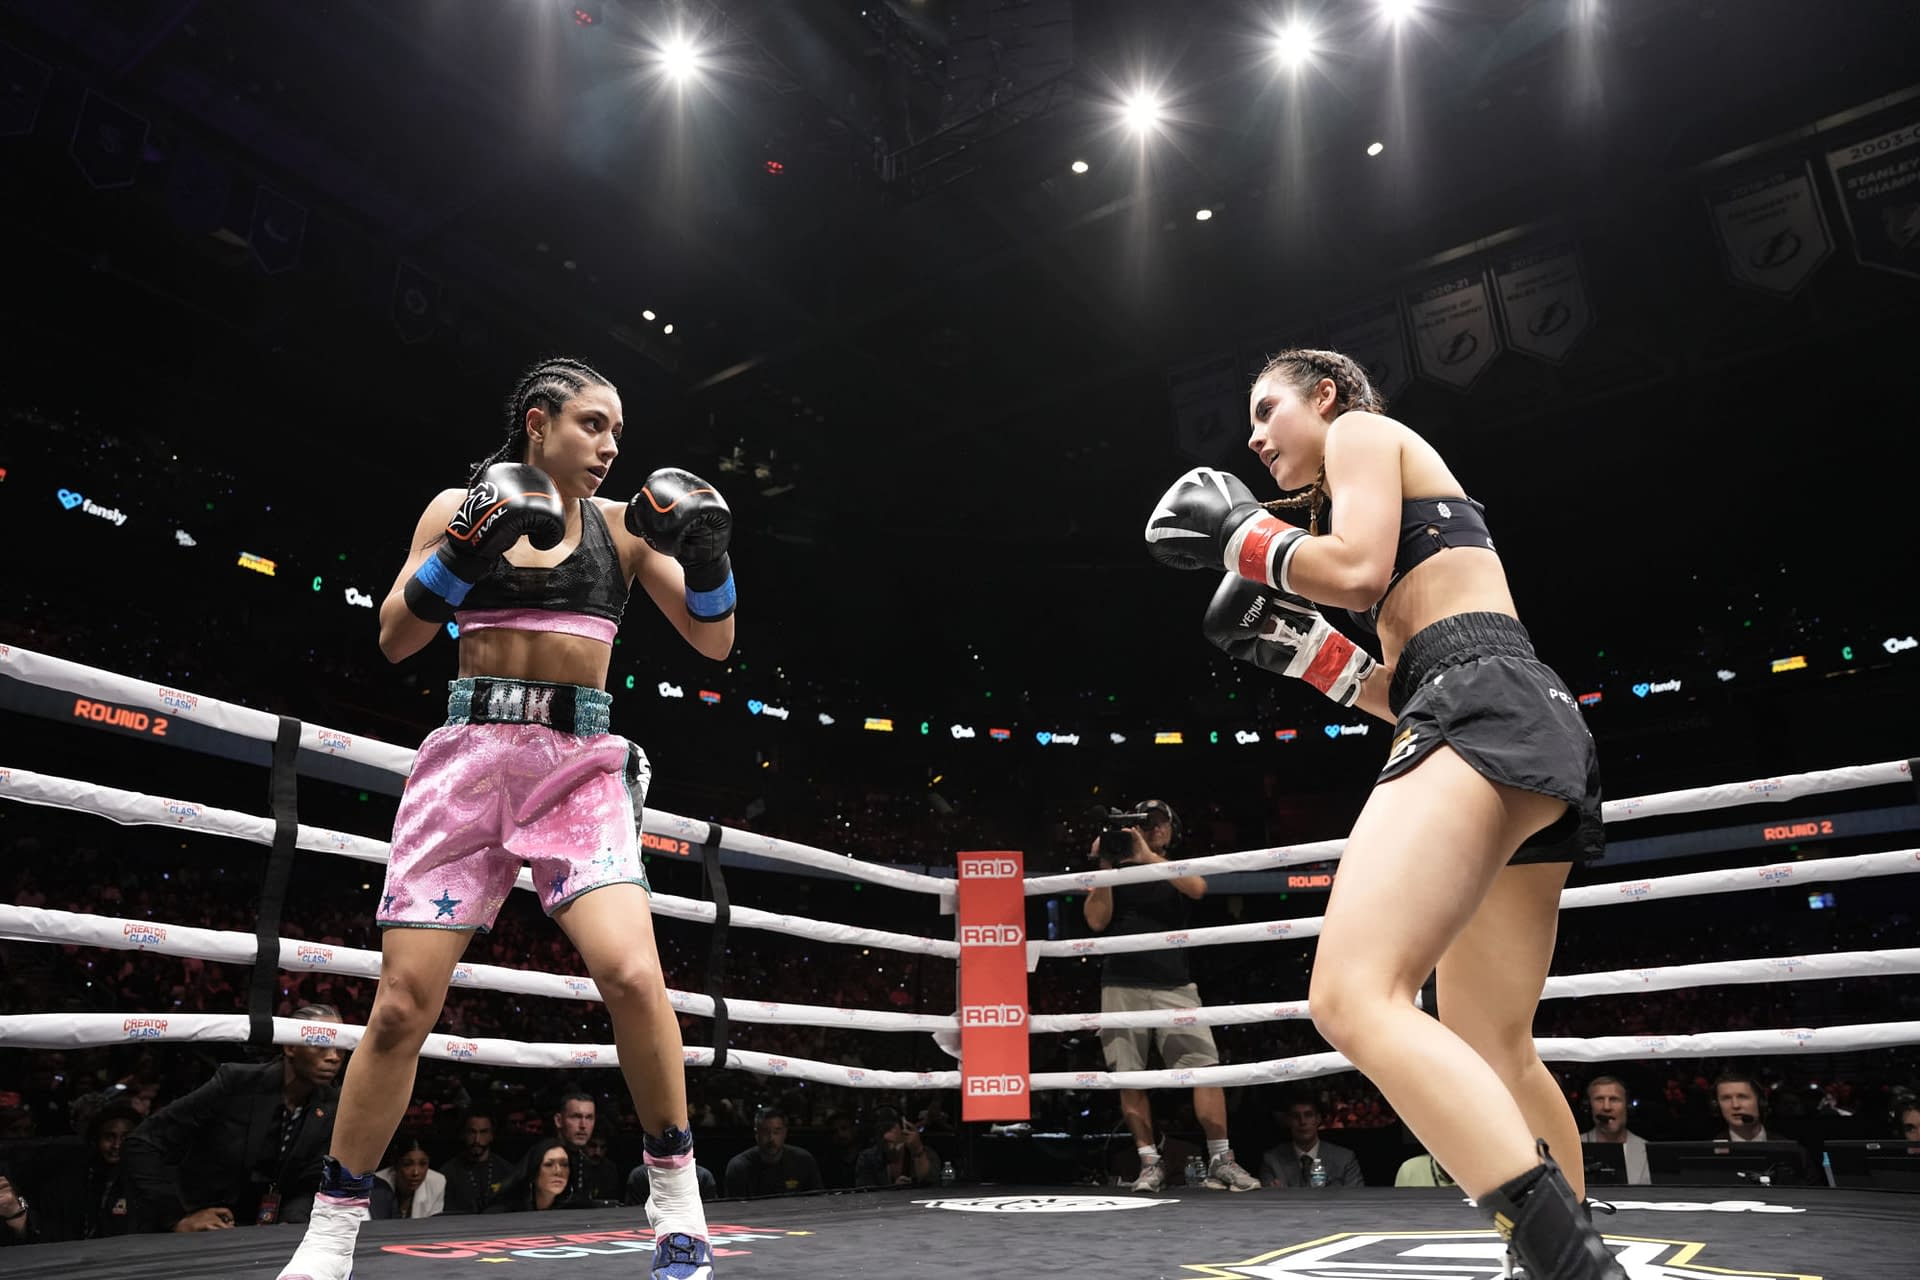 Michelle Khare on Beating Up Andrea Botez